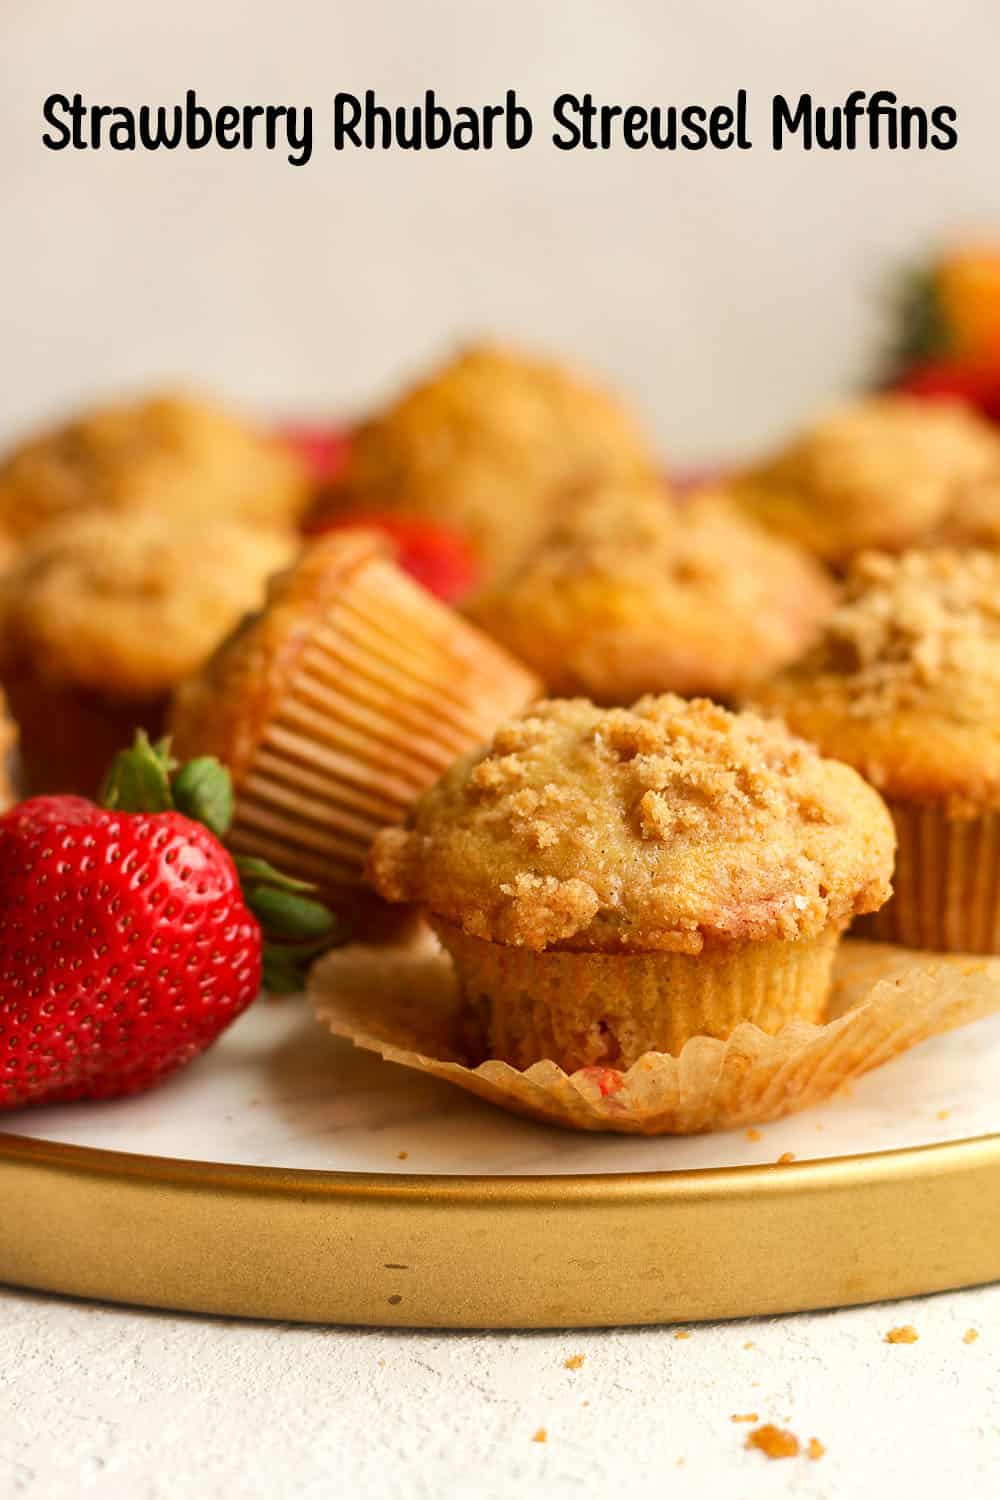 Side view of a tray of rhubarb streusel muffin.